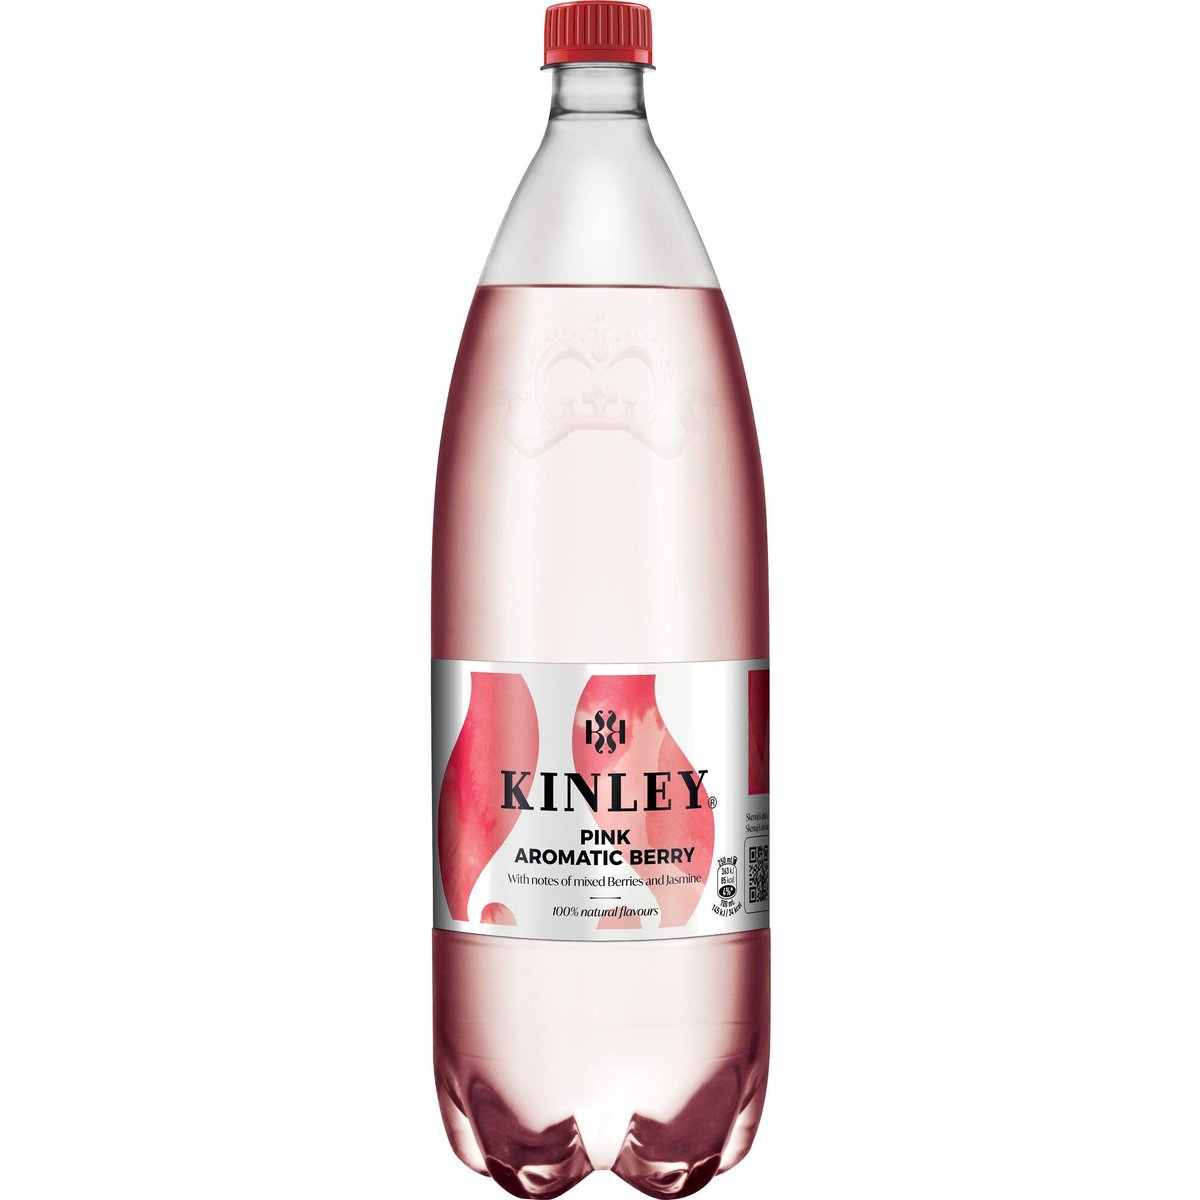 Kinley Pink Aromatic Berry